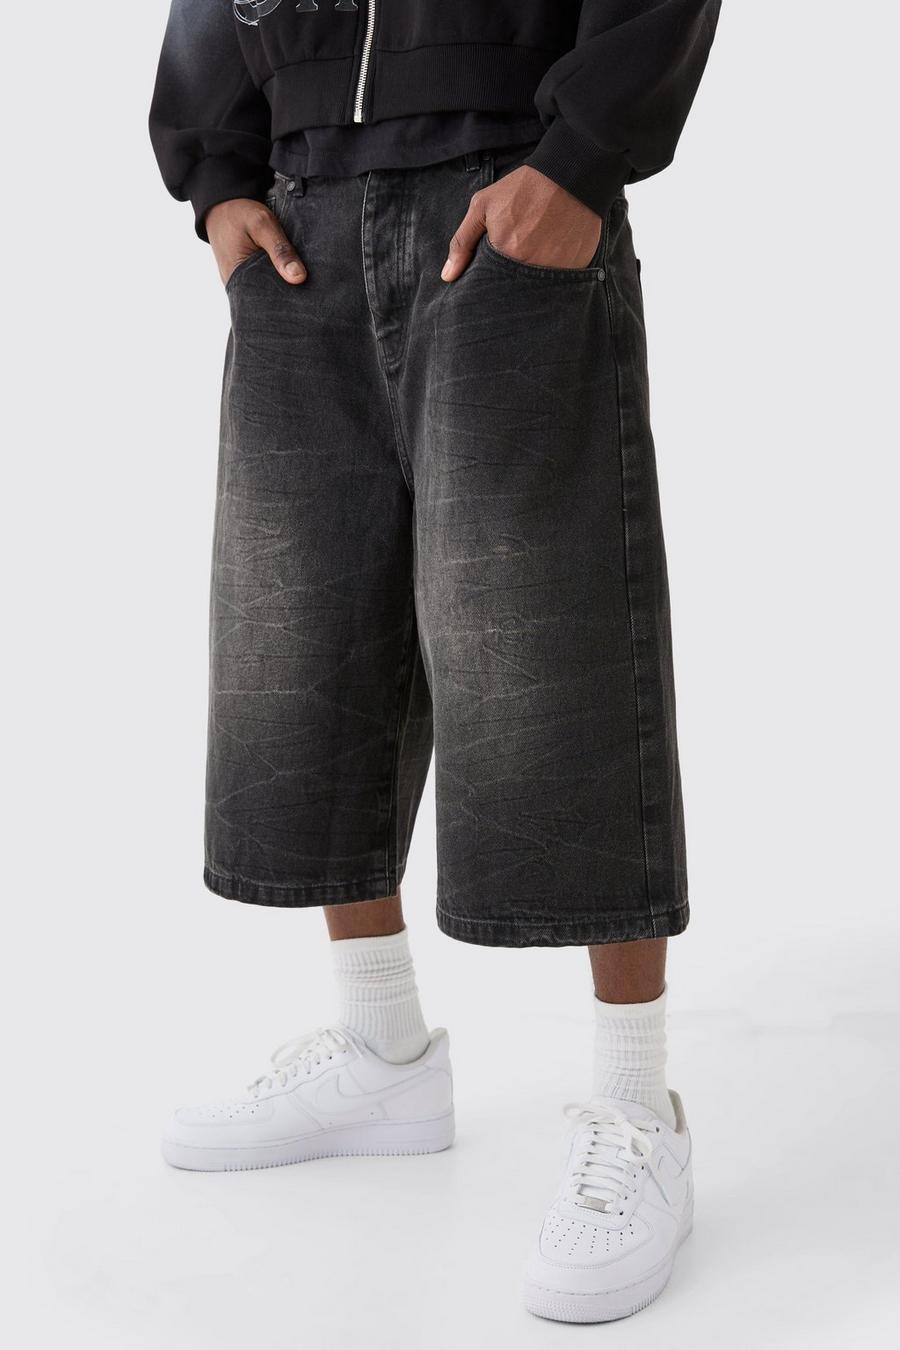 Long Line tory Jorts In Washed Black